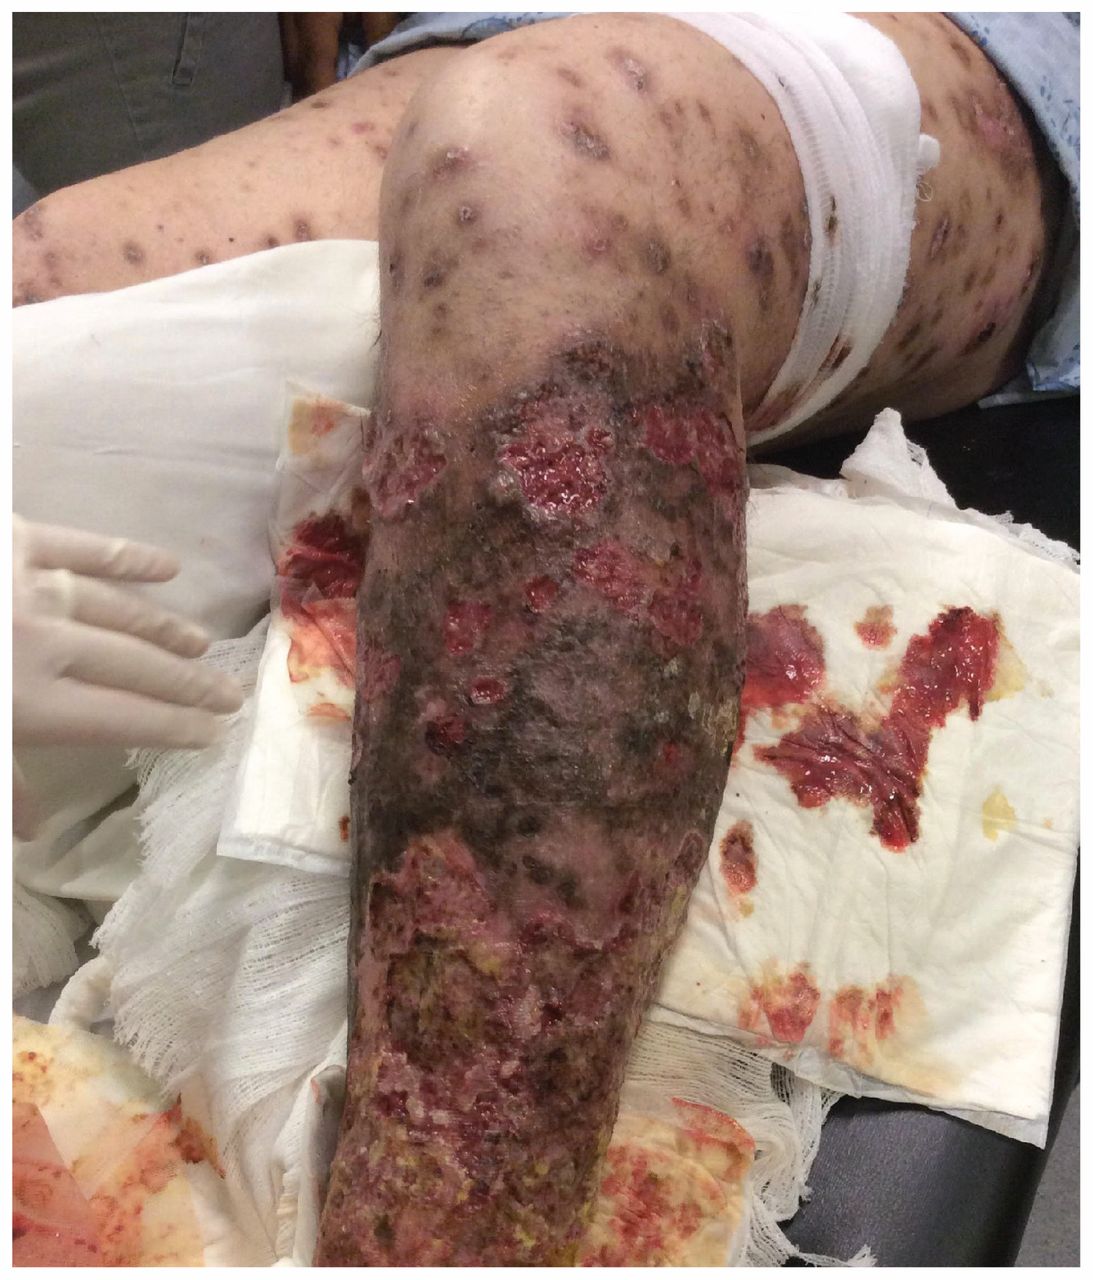 Necrotic leg ulcers associated with krokodil injection in a 41